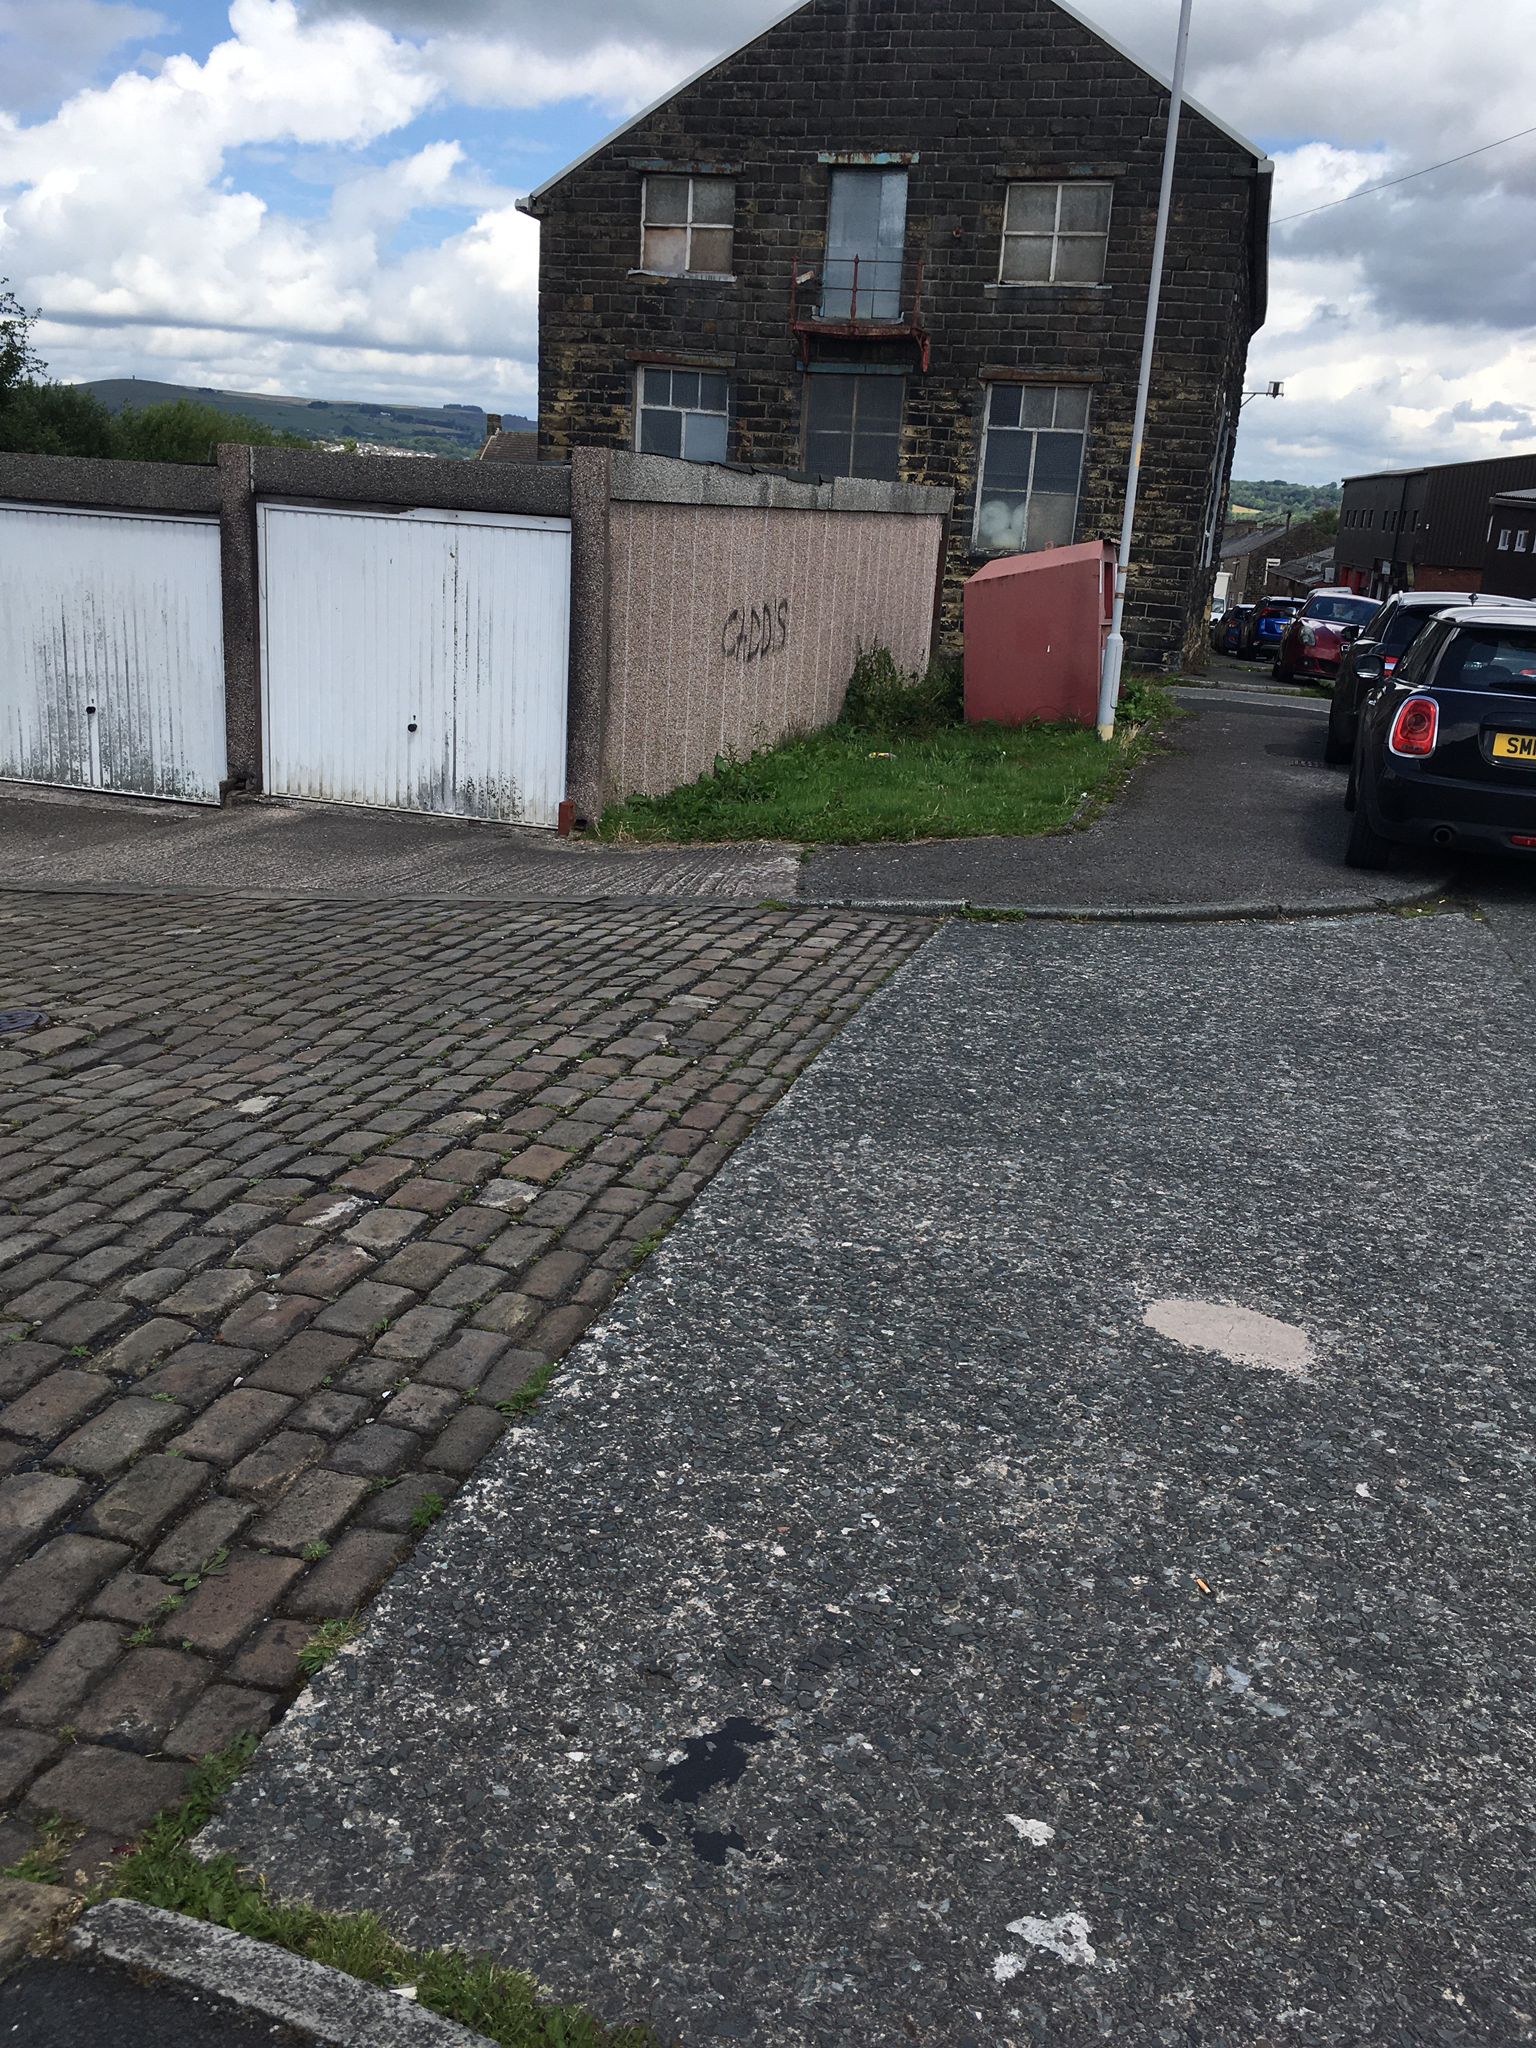 A Burnley man has been fined for fly-tipping in Pendle.